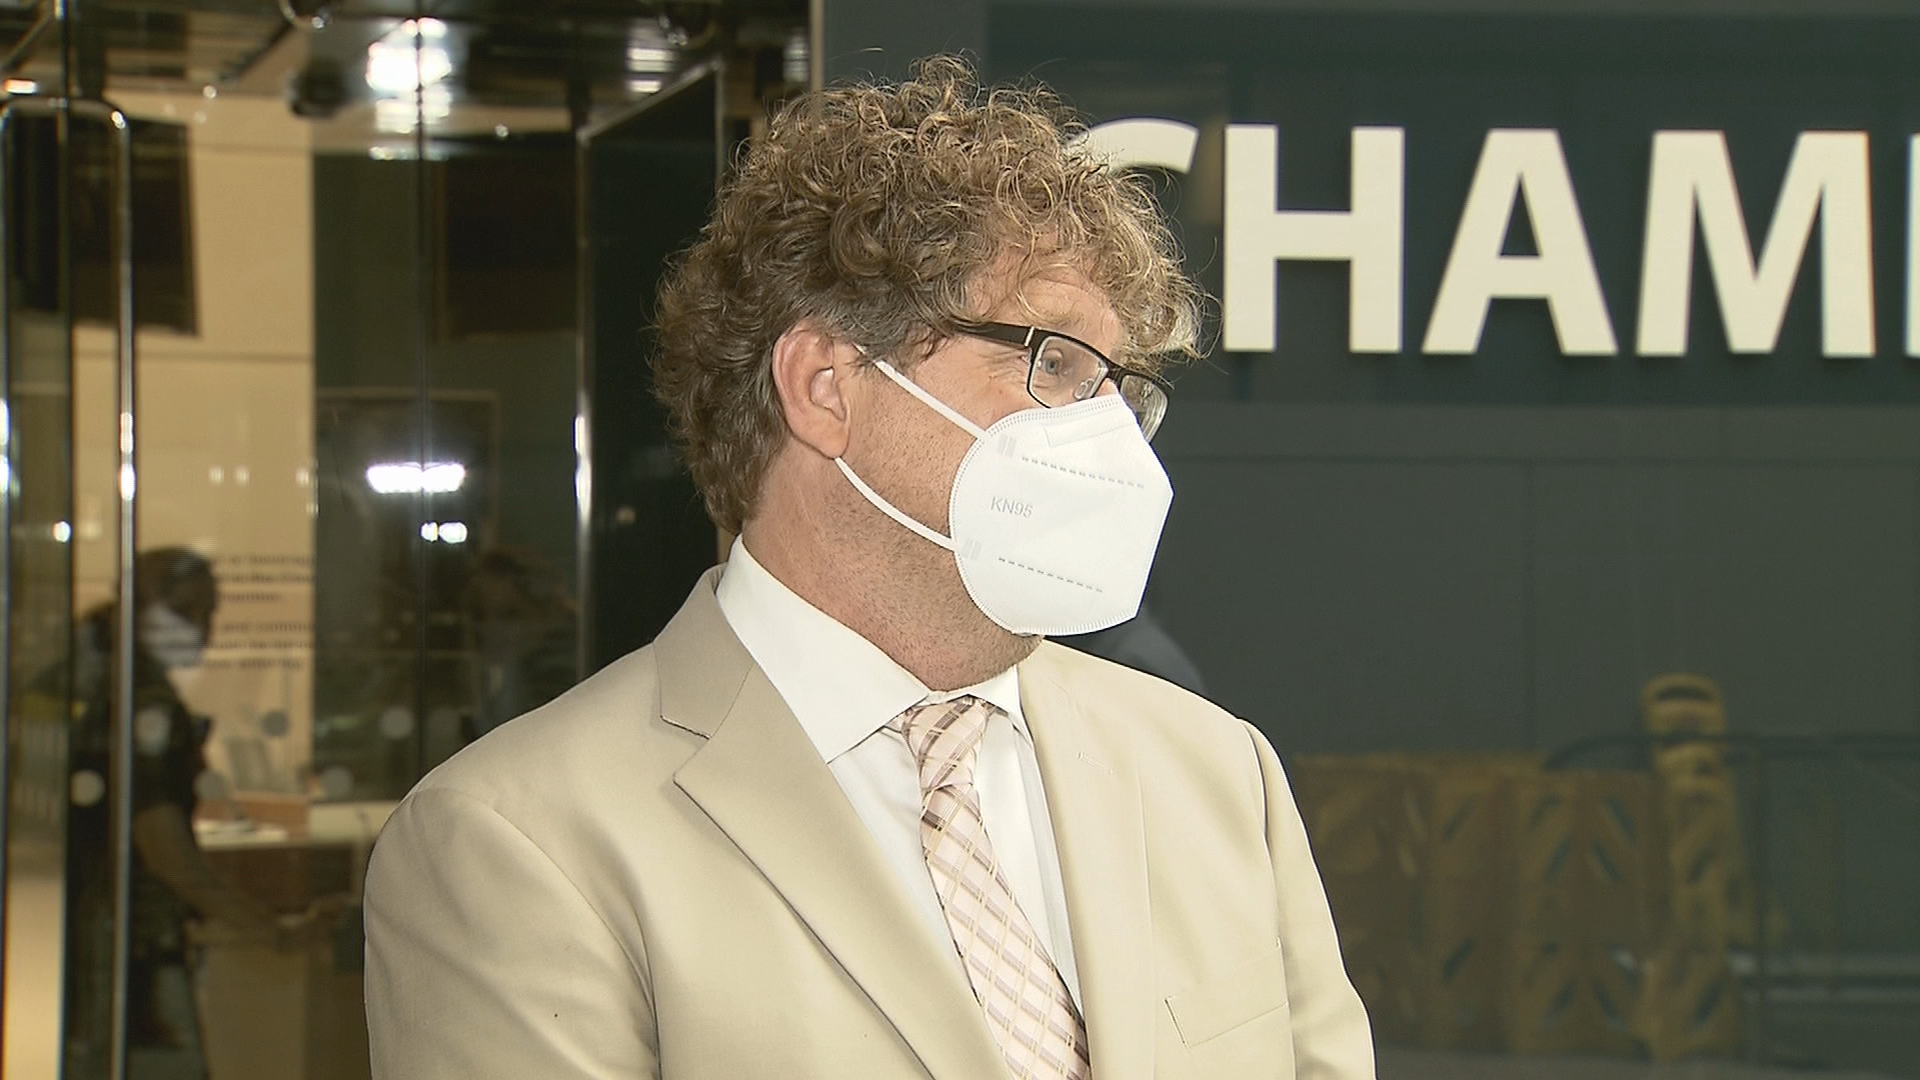 Calgary Ward 9 councillor Gian-Carlo Carra speaks to reporters wearing a face mask and a light coloured suit and tie